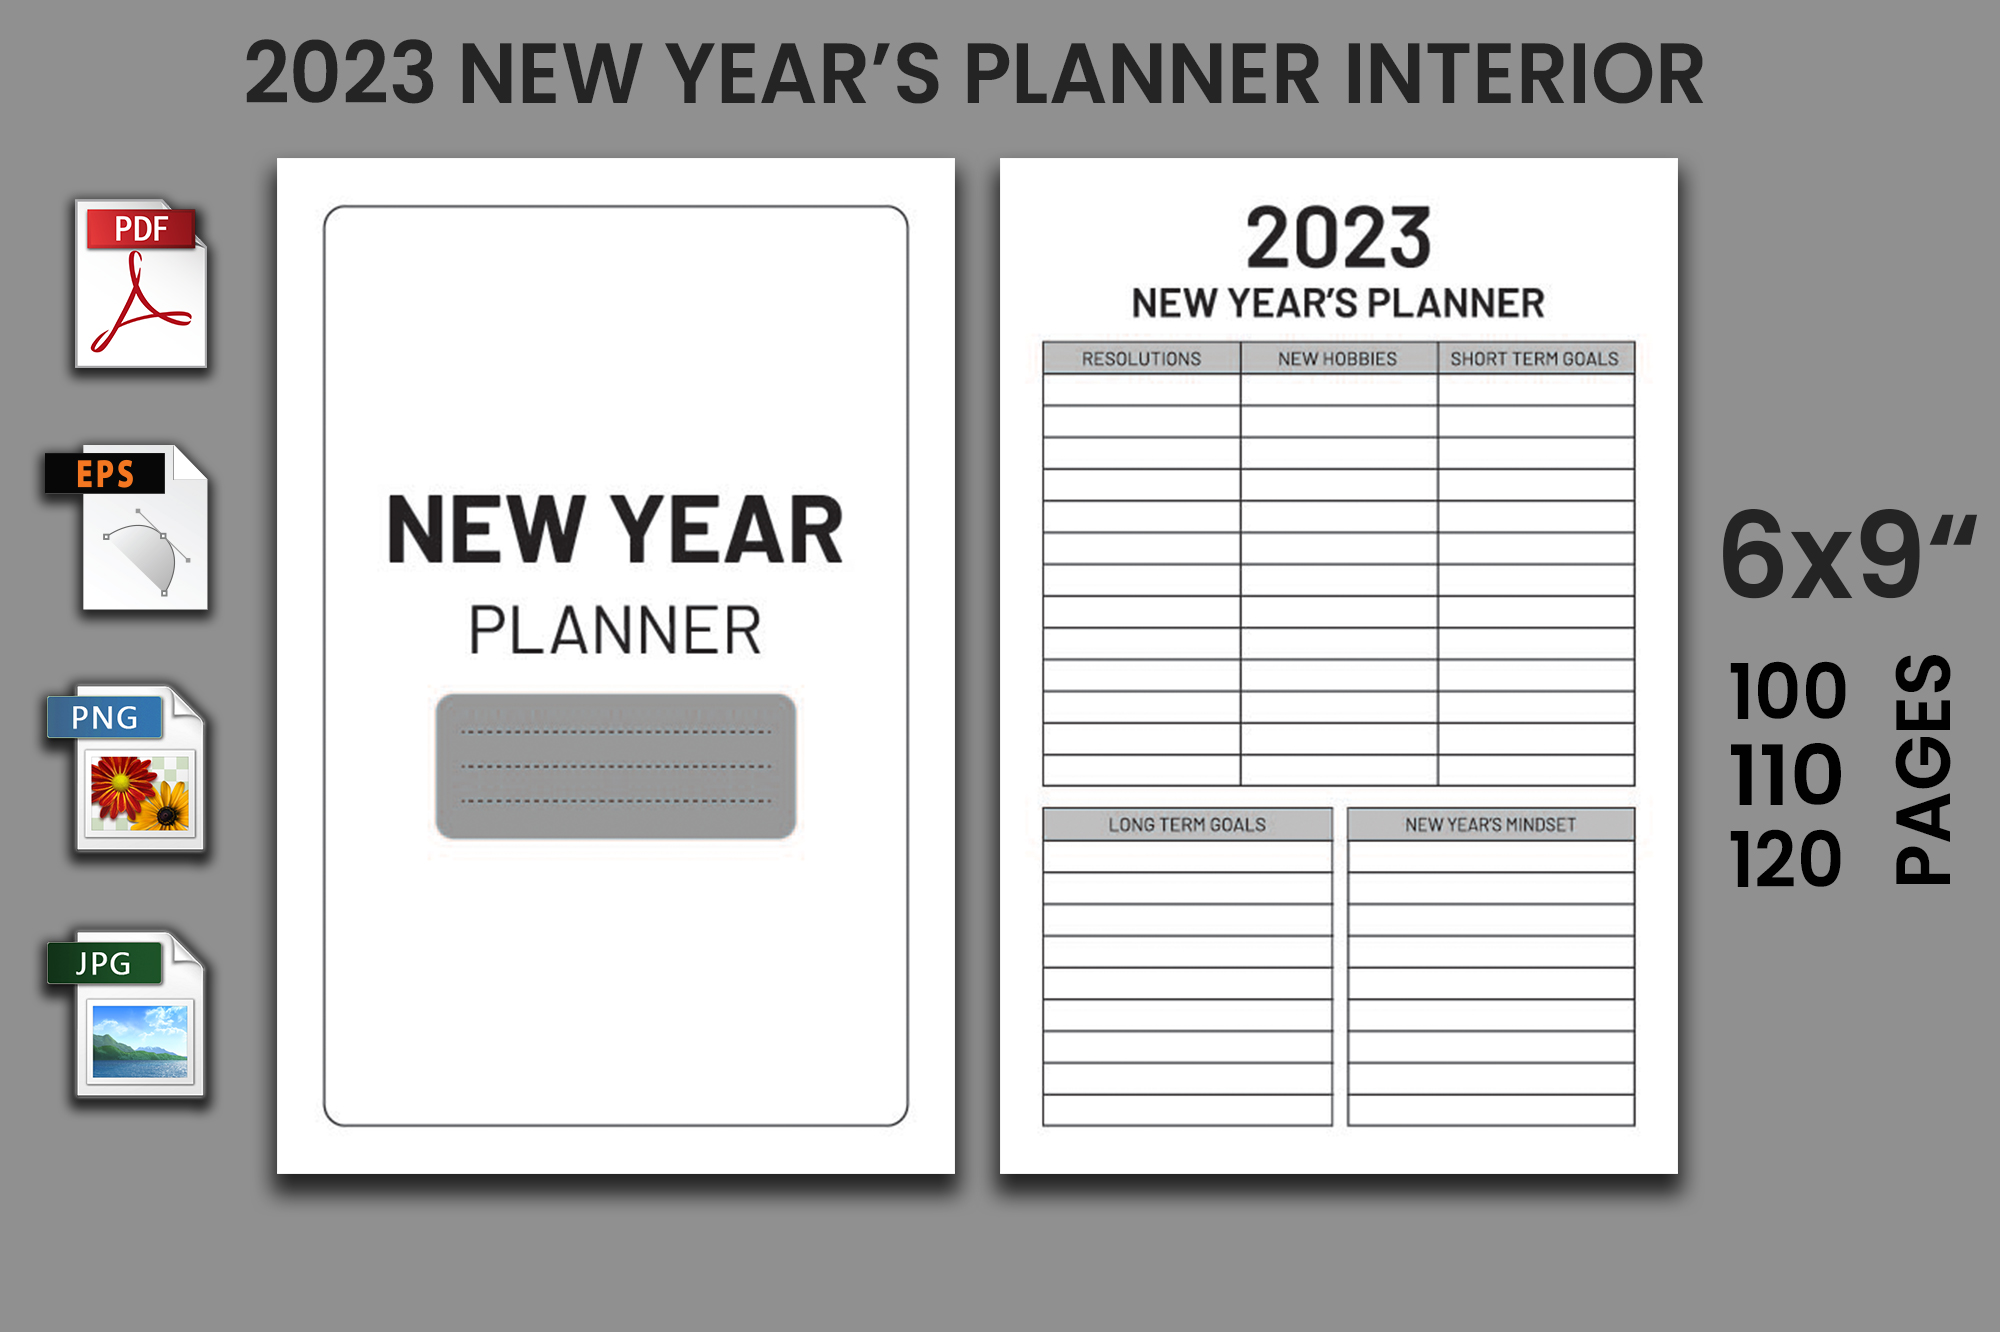 New year's planner is shown with the new year's planner.